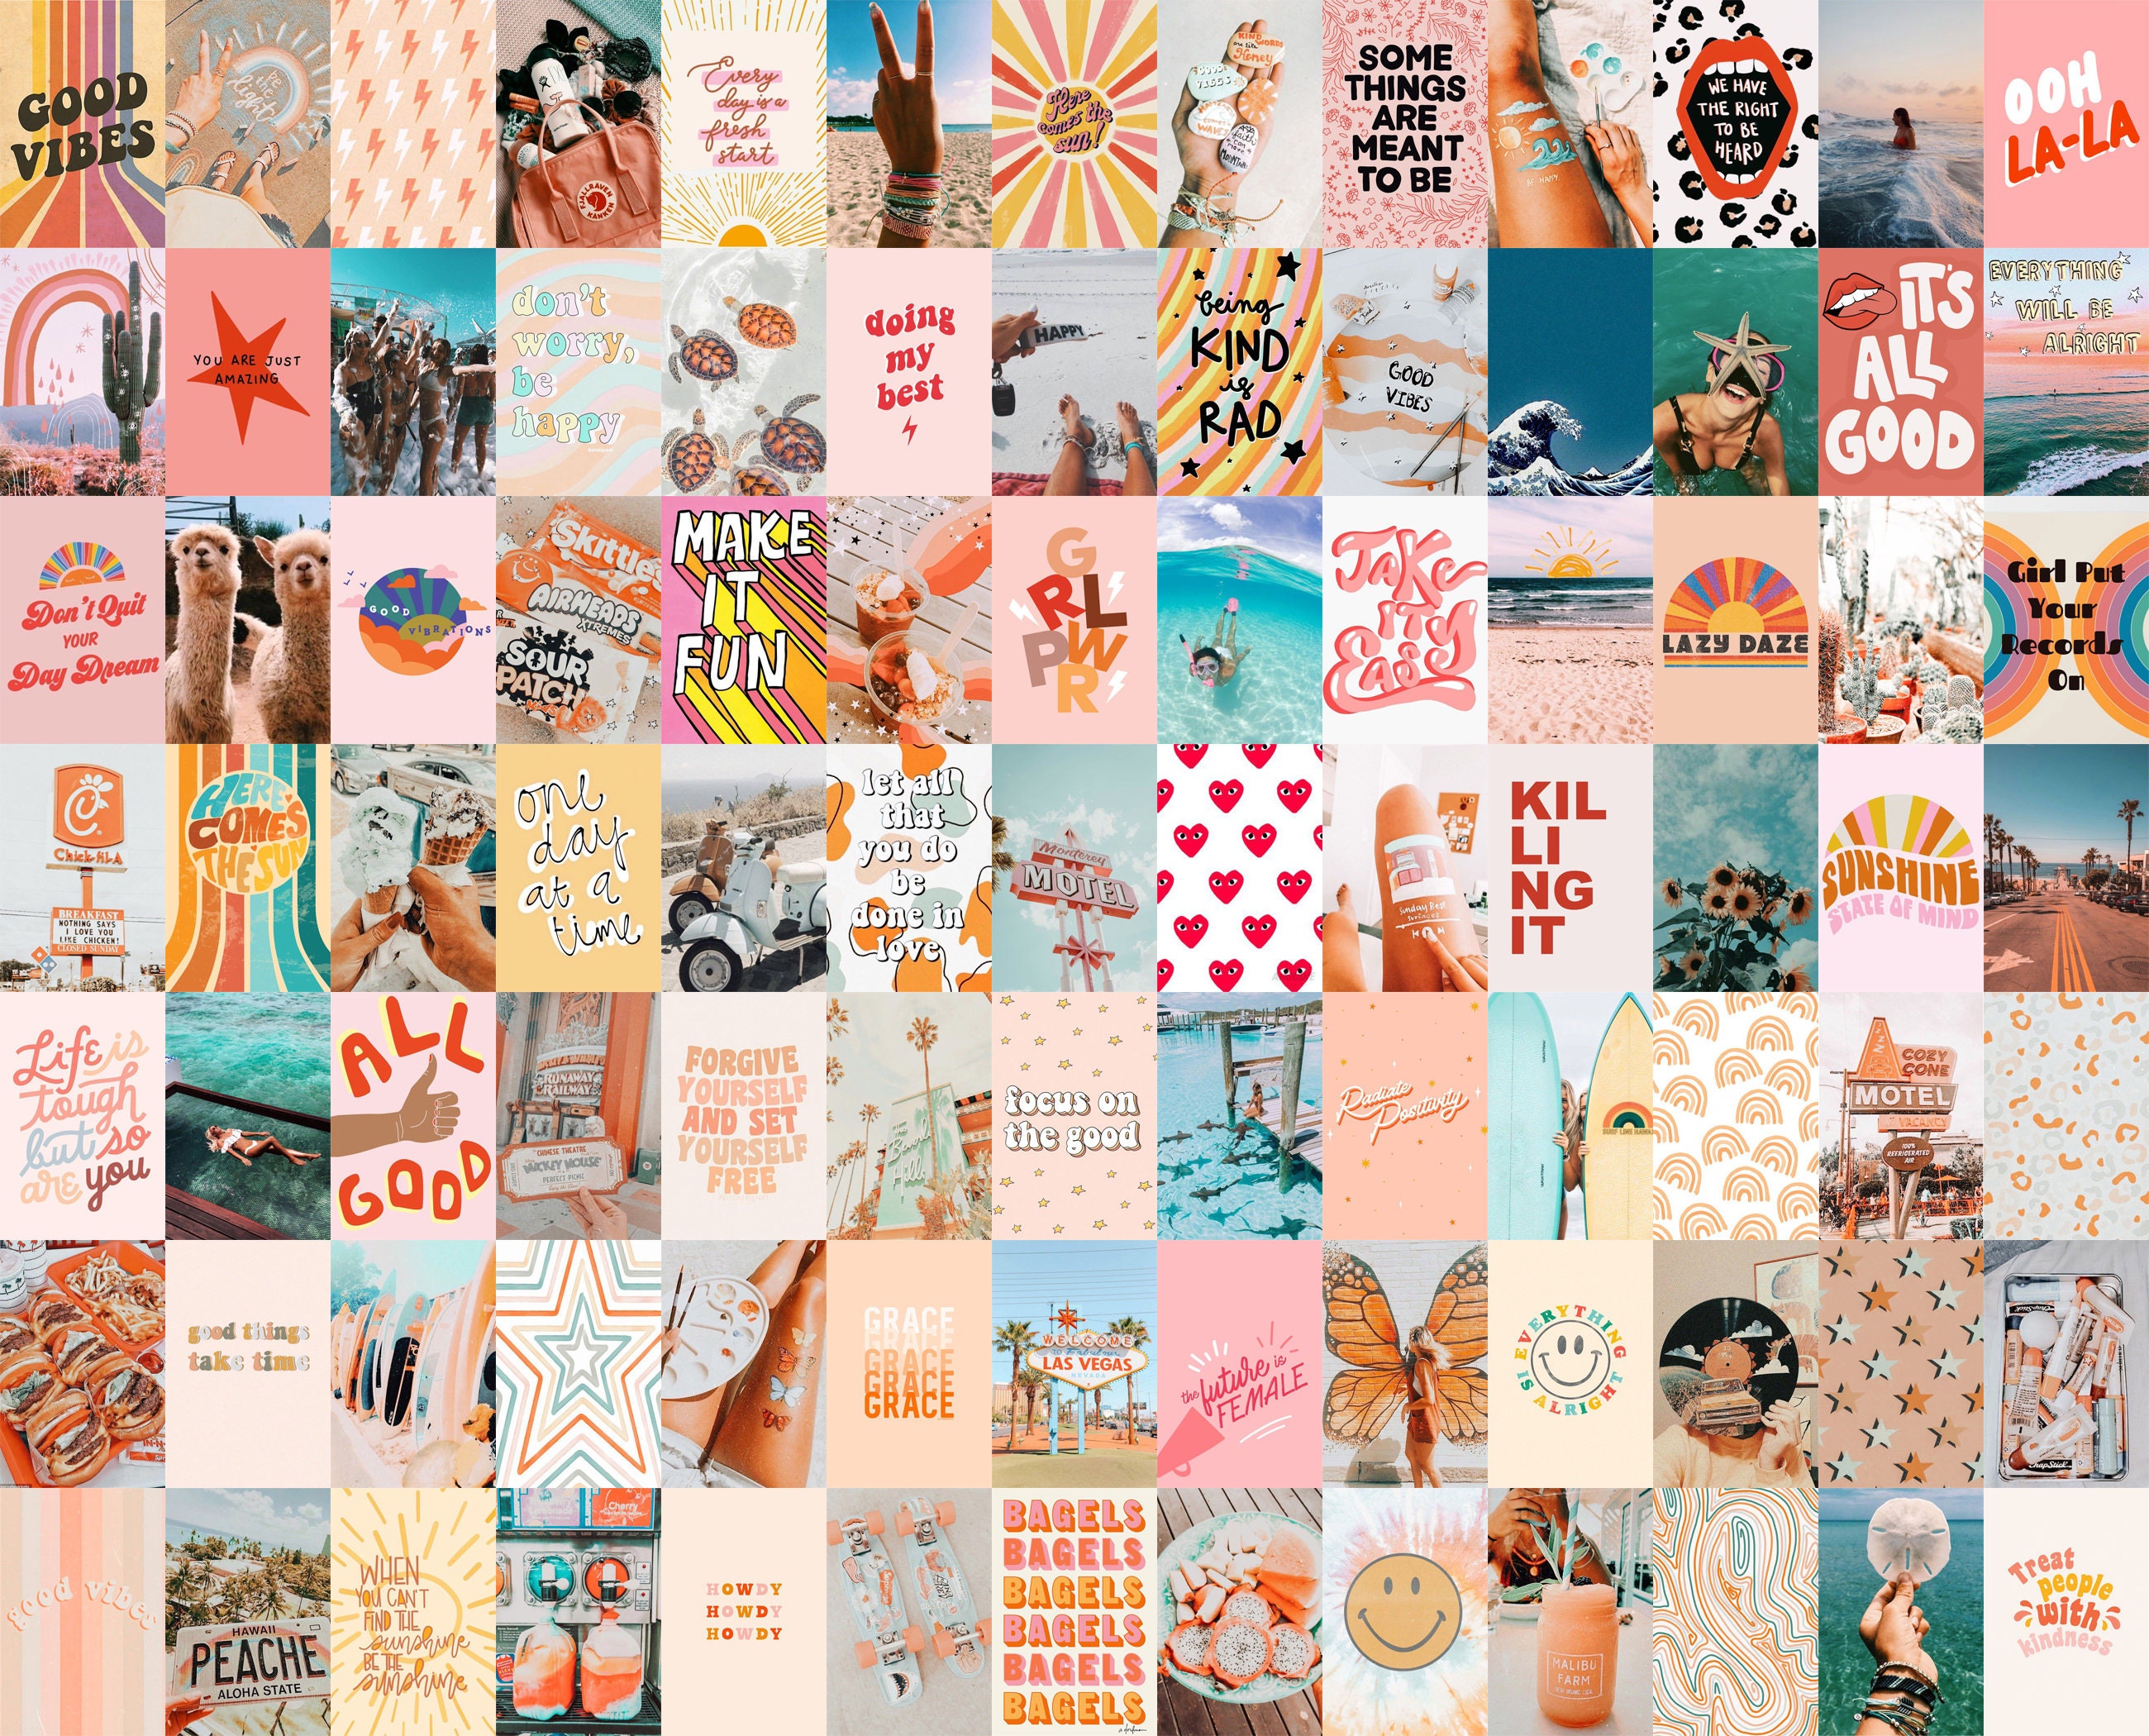 Download Aesthetic VSCO Collage Clashing Patterns Wallpaper